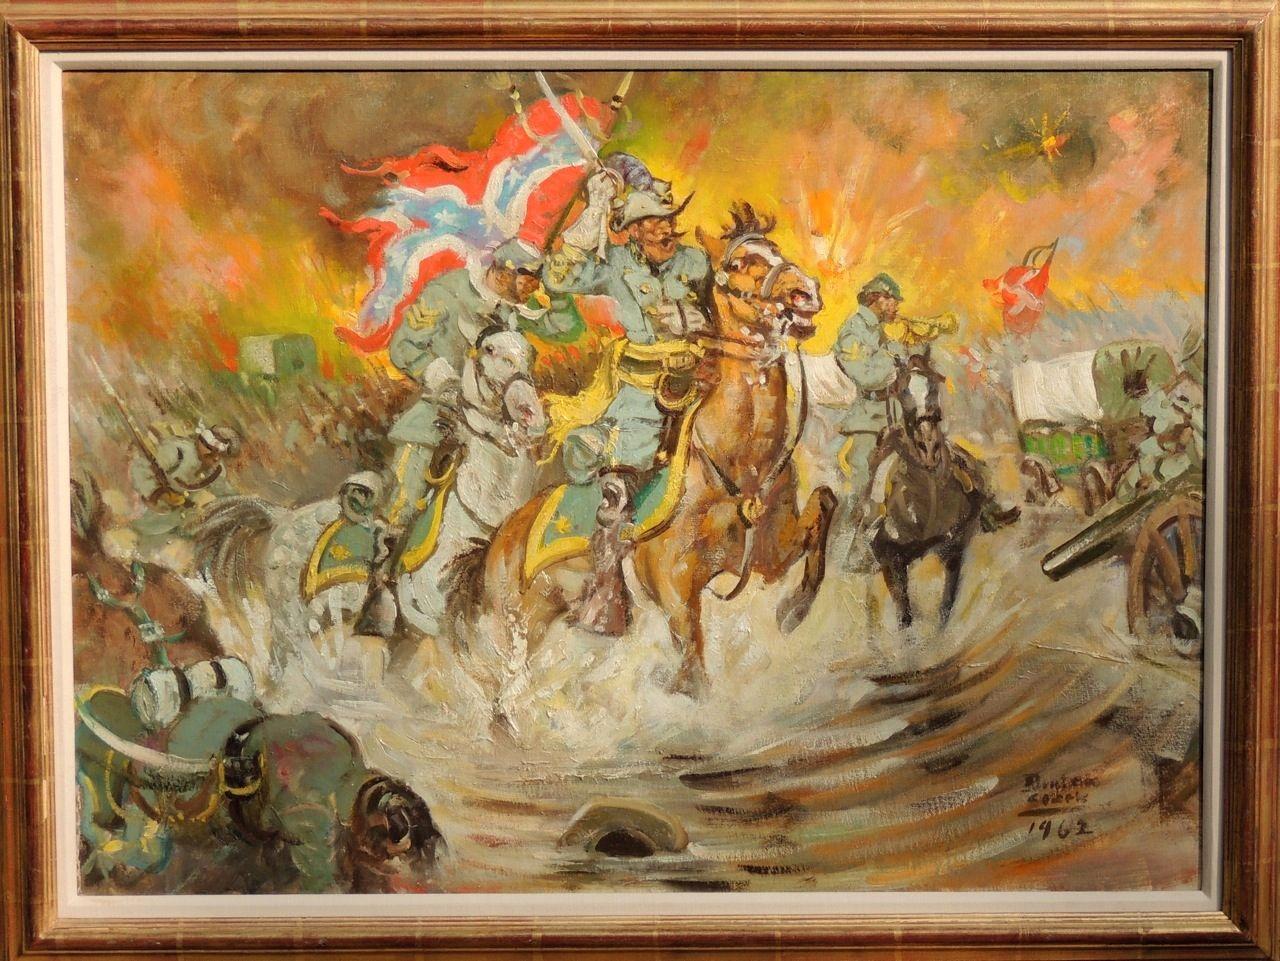 Charge, General Jeb Stuart Leading Charge in Civil War - Painting by Benton Clark